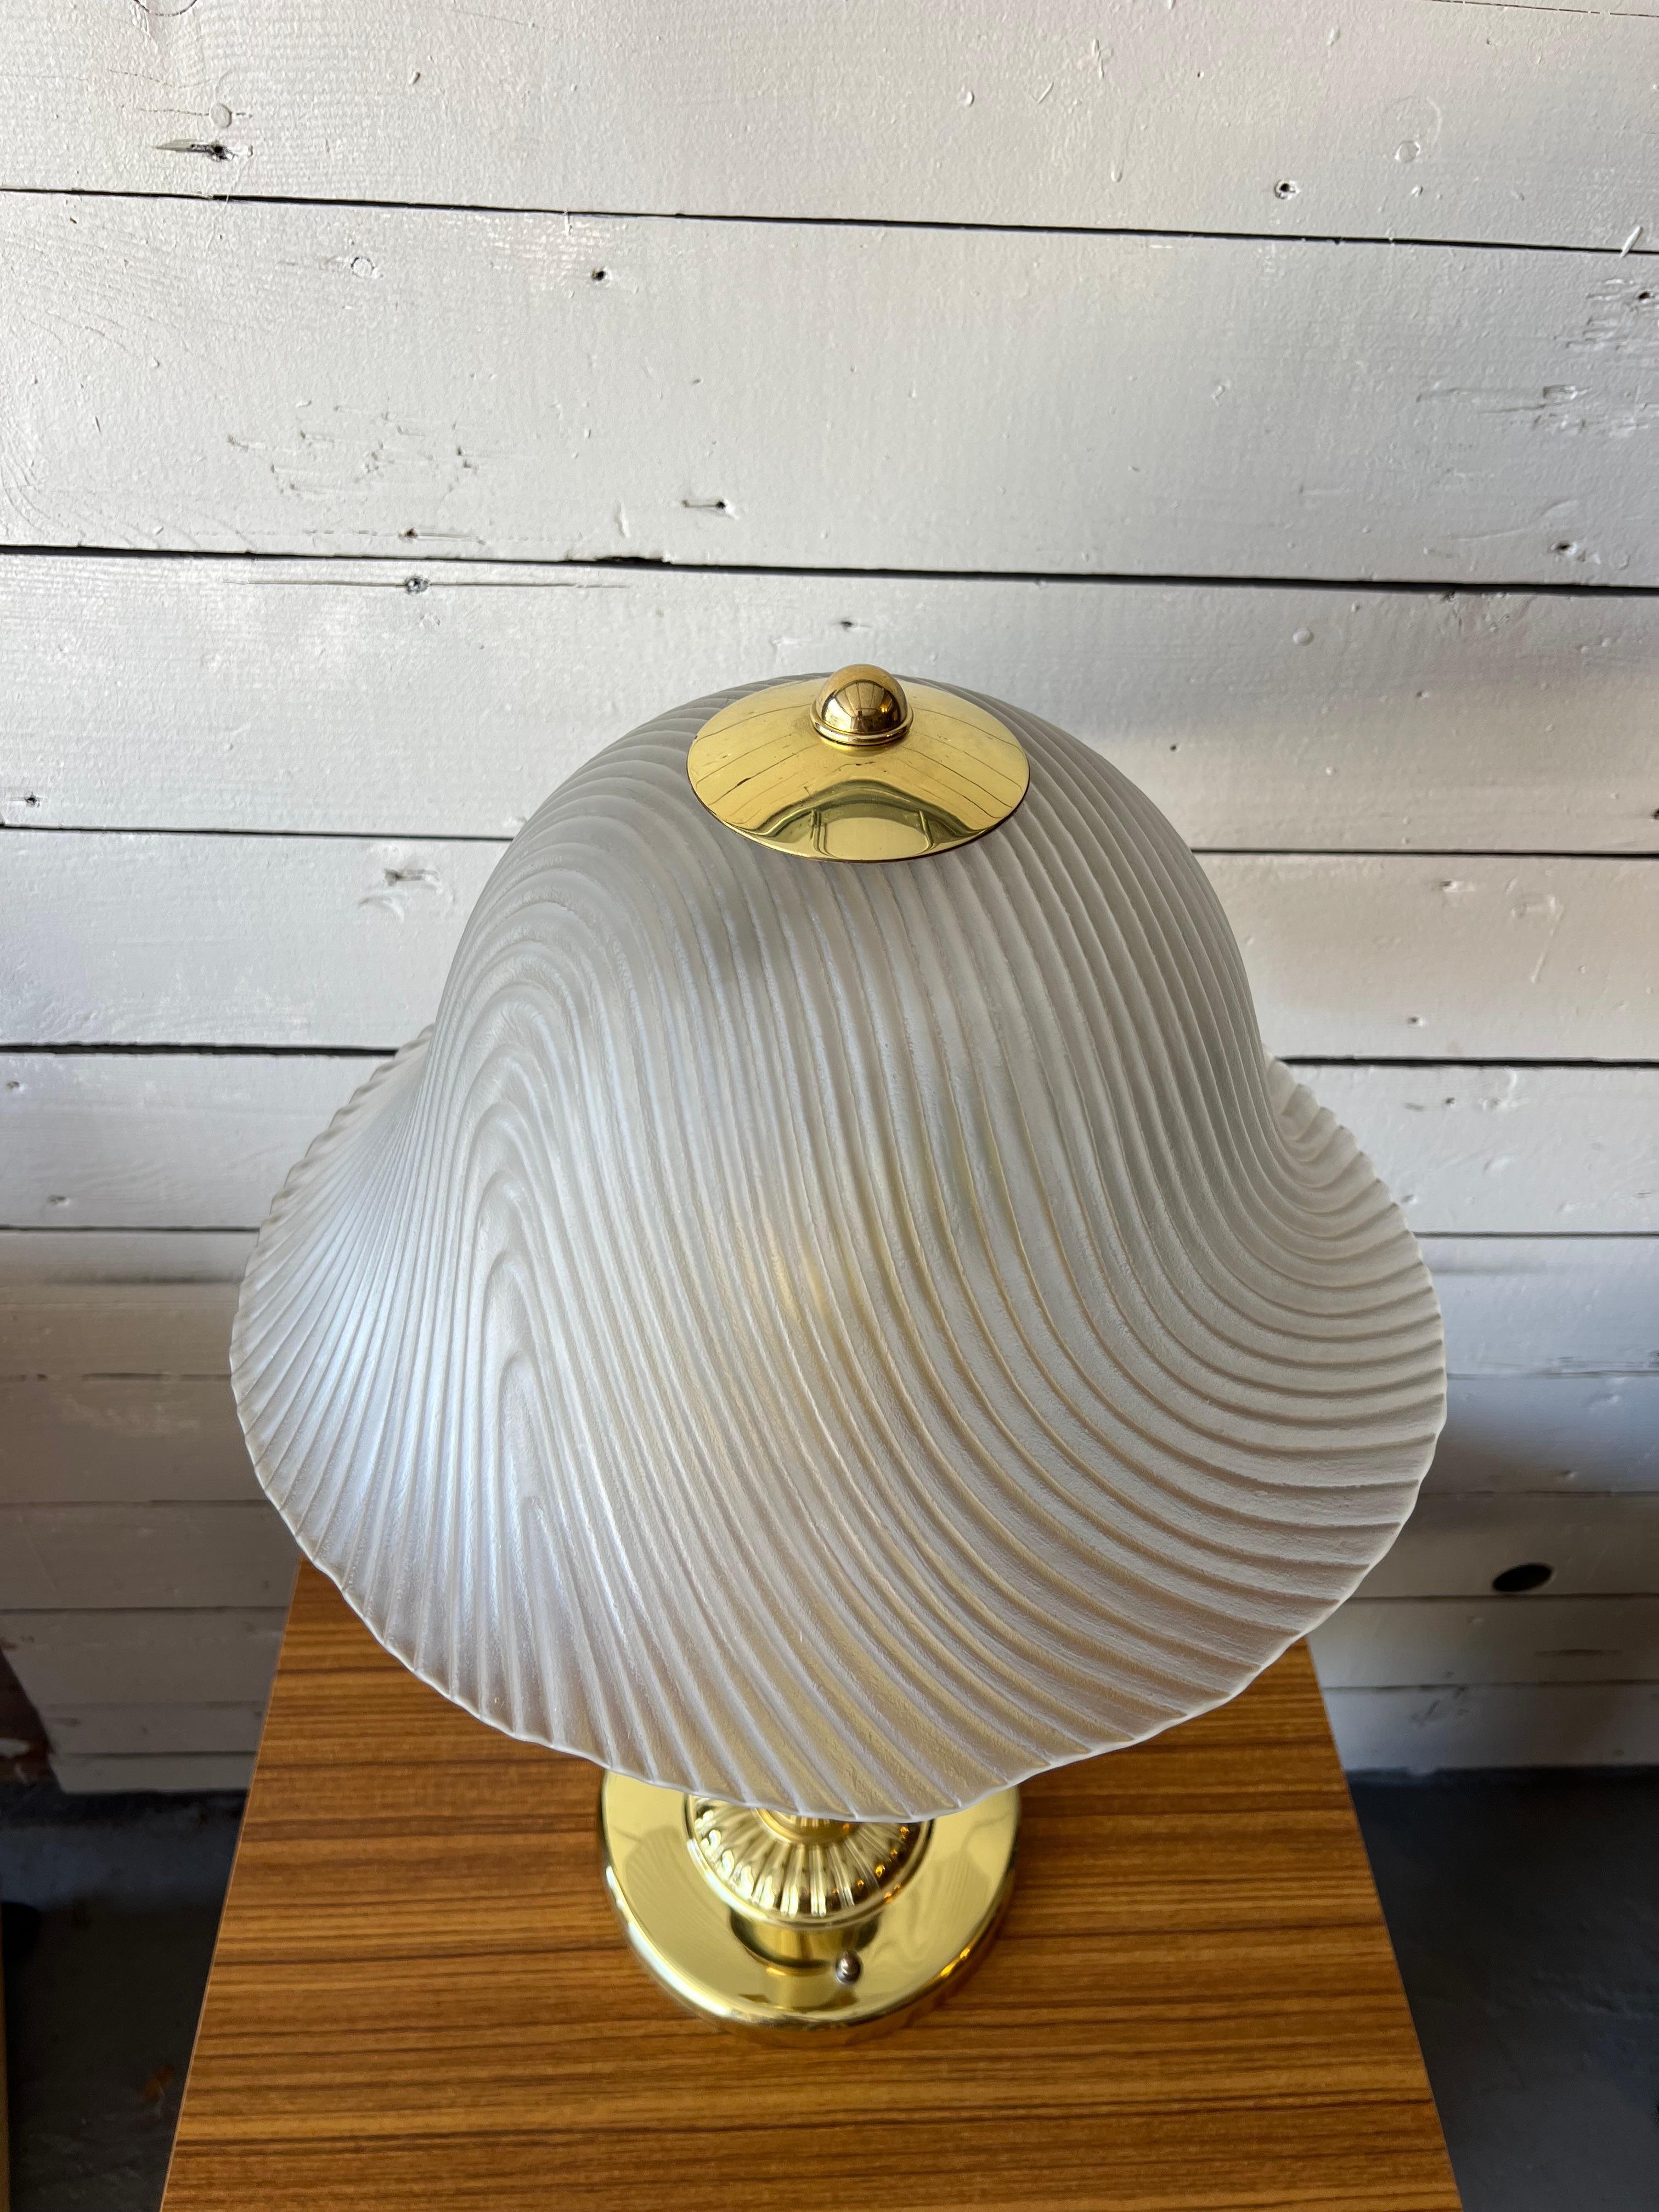 Presenting a gorgeous heavyweight art deco hollywood regency table lamp. Complete with a gold tone weighted base and stem and topped with a curvy, ribbed frosted glass shade. Two bulbs for double the brightness. 

Overall excellent vintage